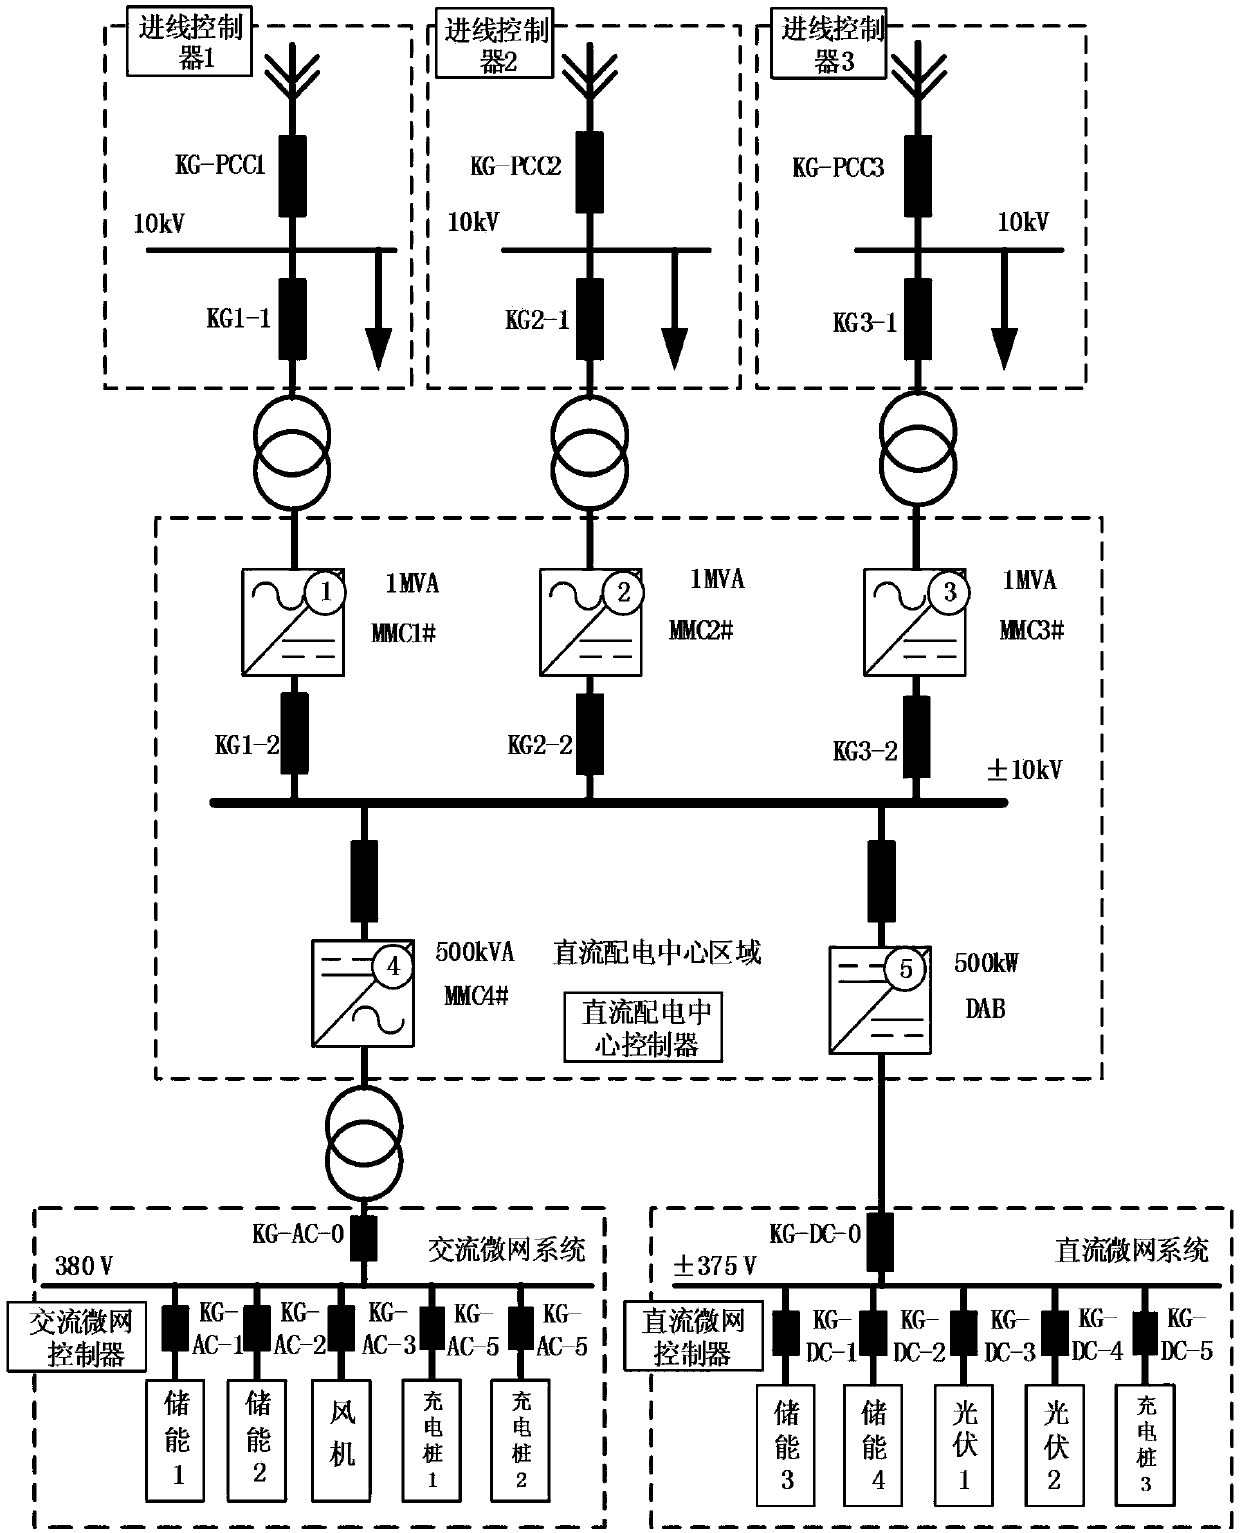 A flexible power distribution network real-time simulation information modeling method